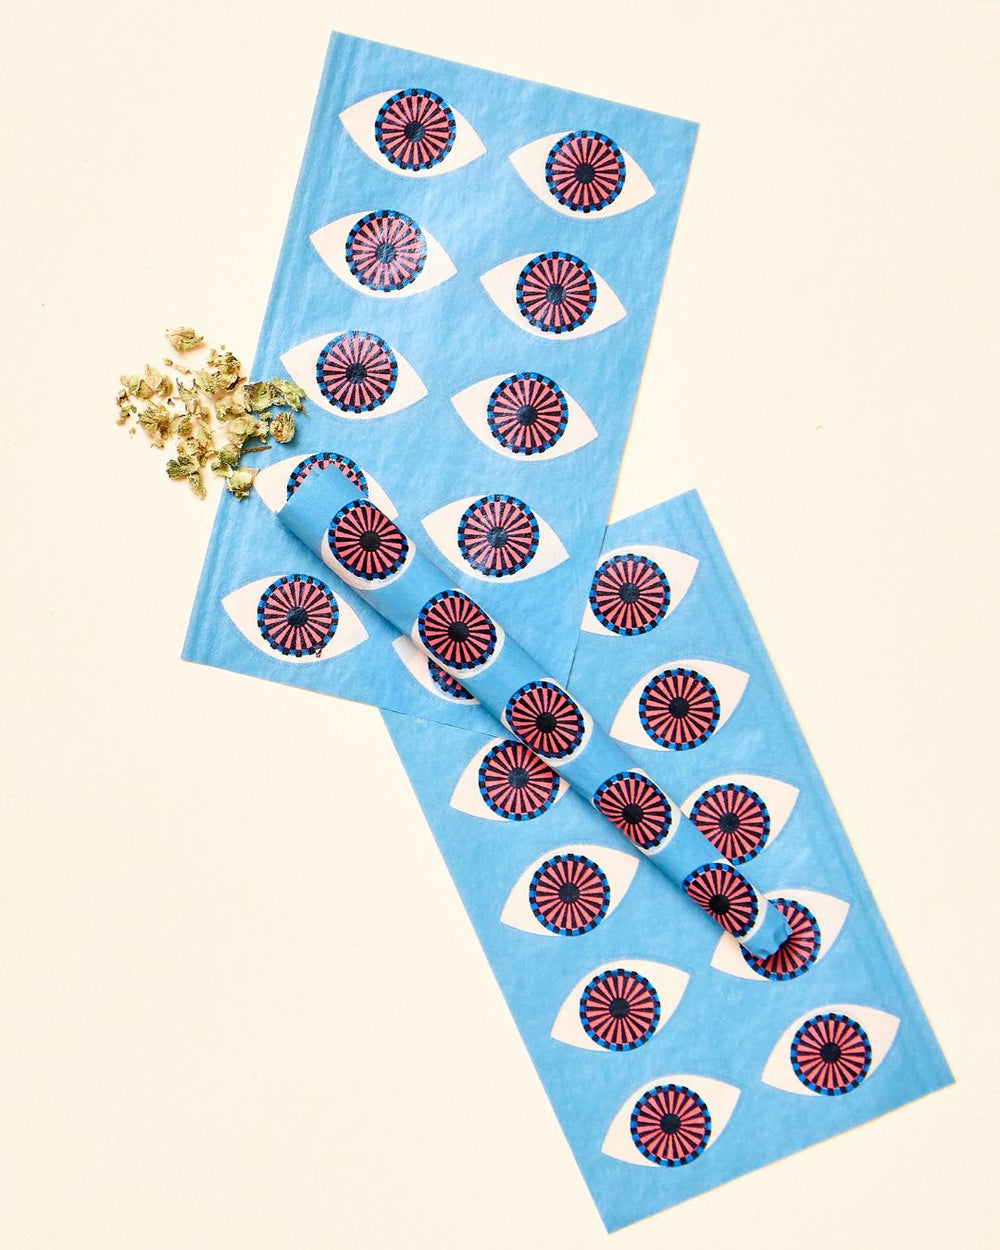 Third eye printed rolling papers by Field Trip NYC.